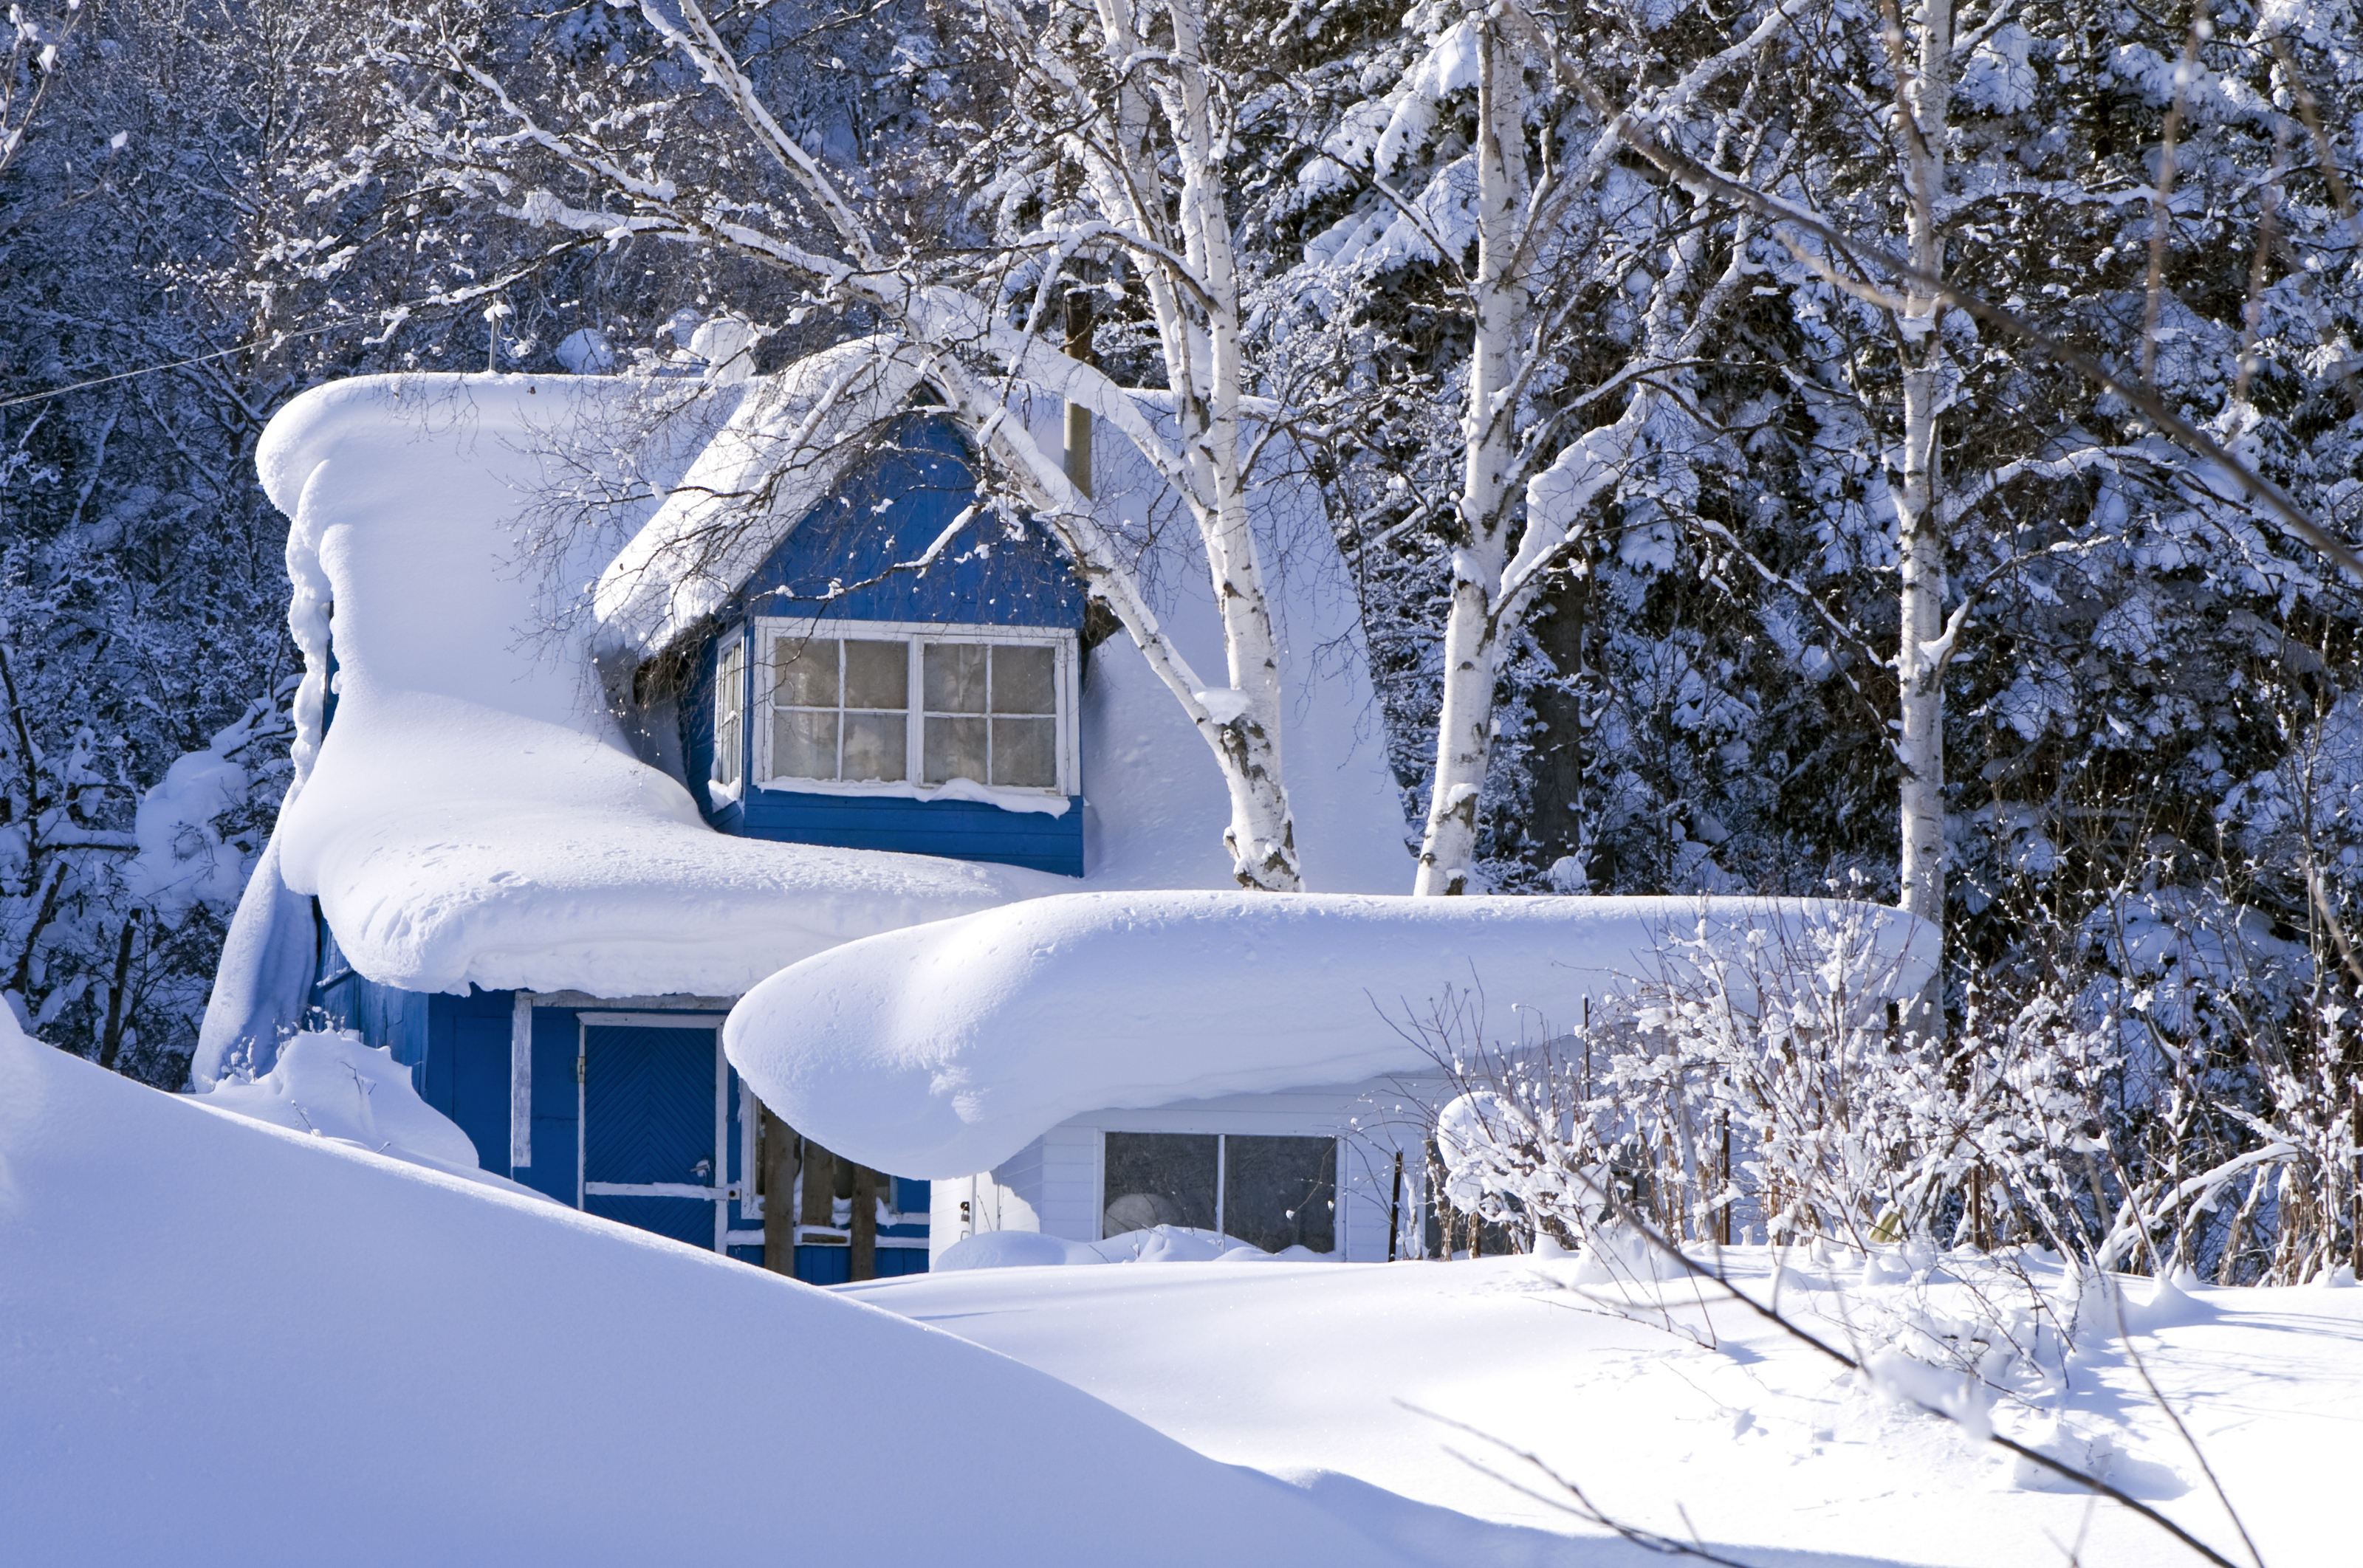 How Do You Remove Snow From Your Roof? | Snow Removal